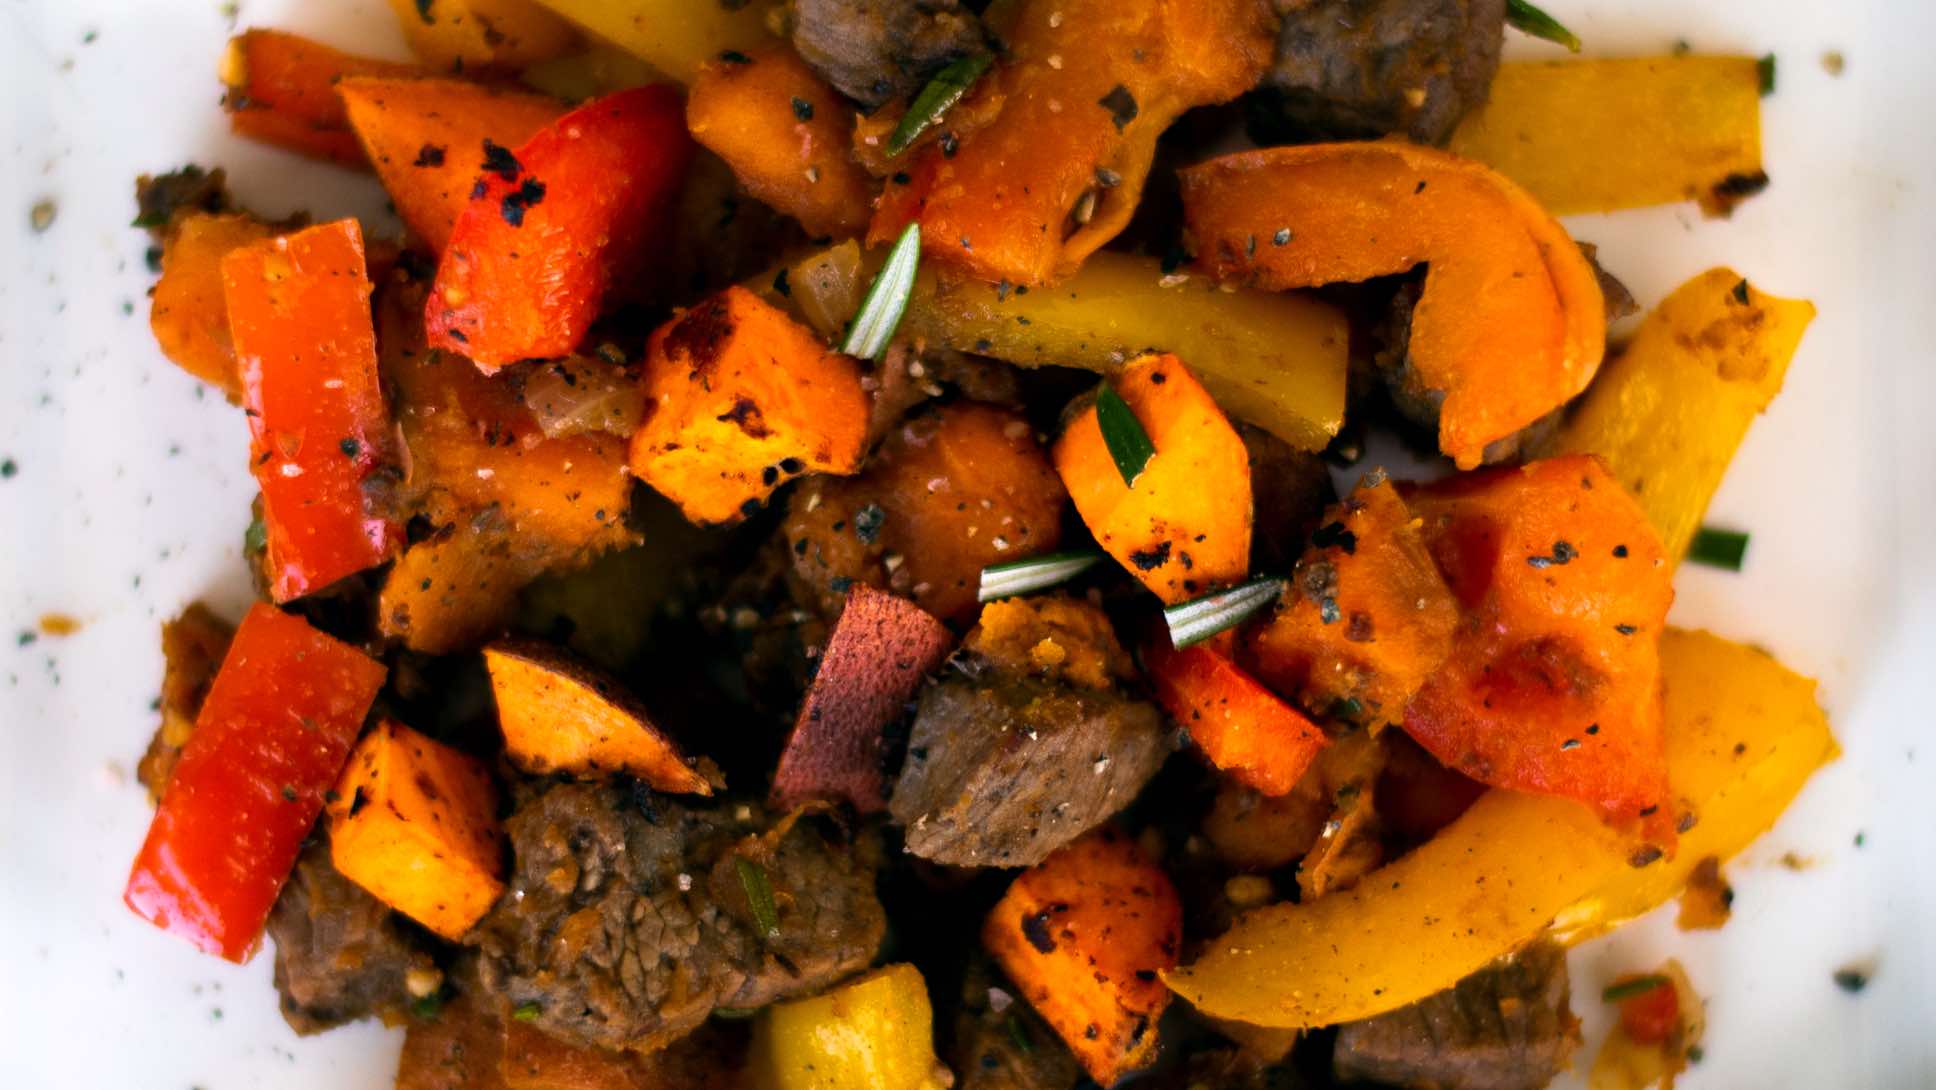 Steak bites with sweet potatoes and peppers.